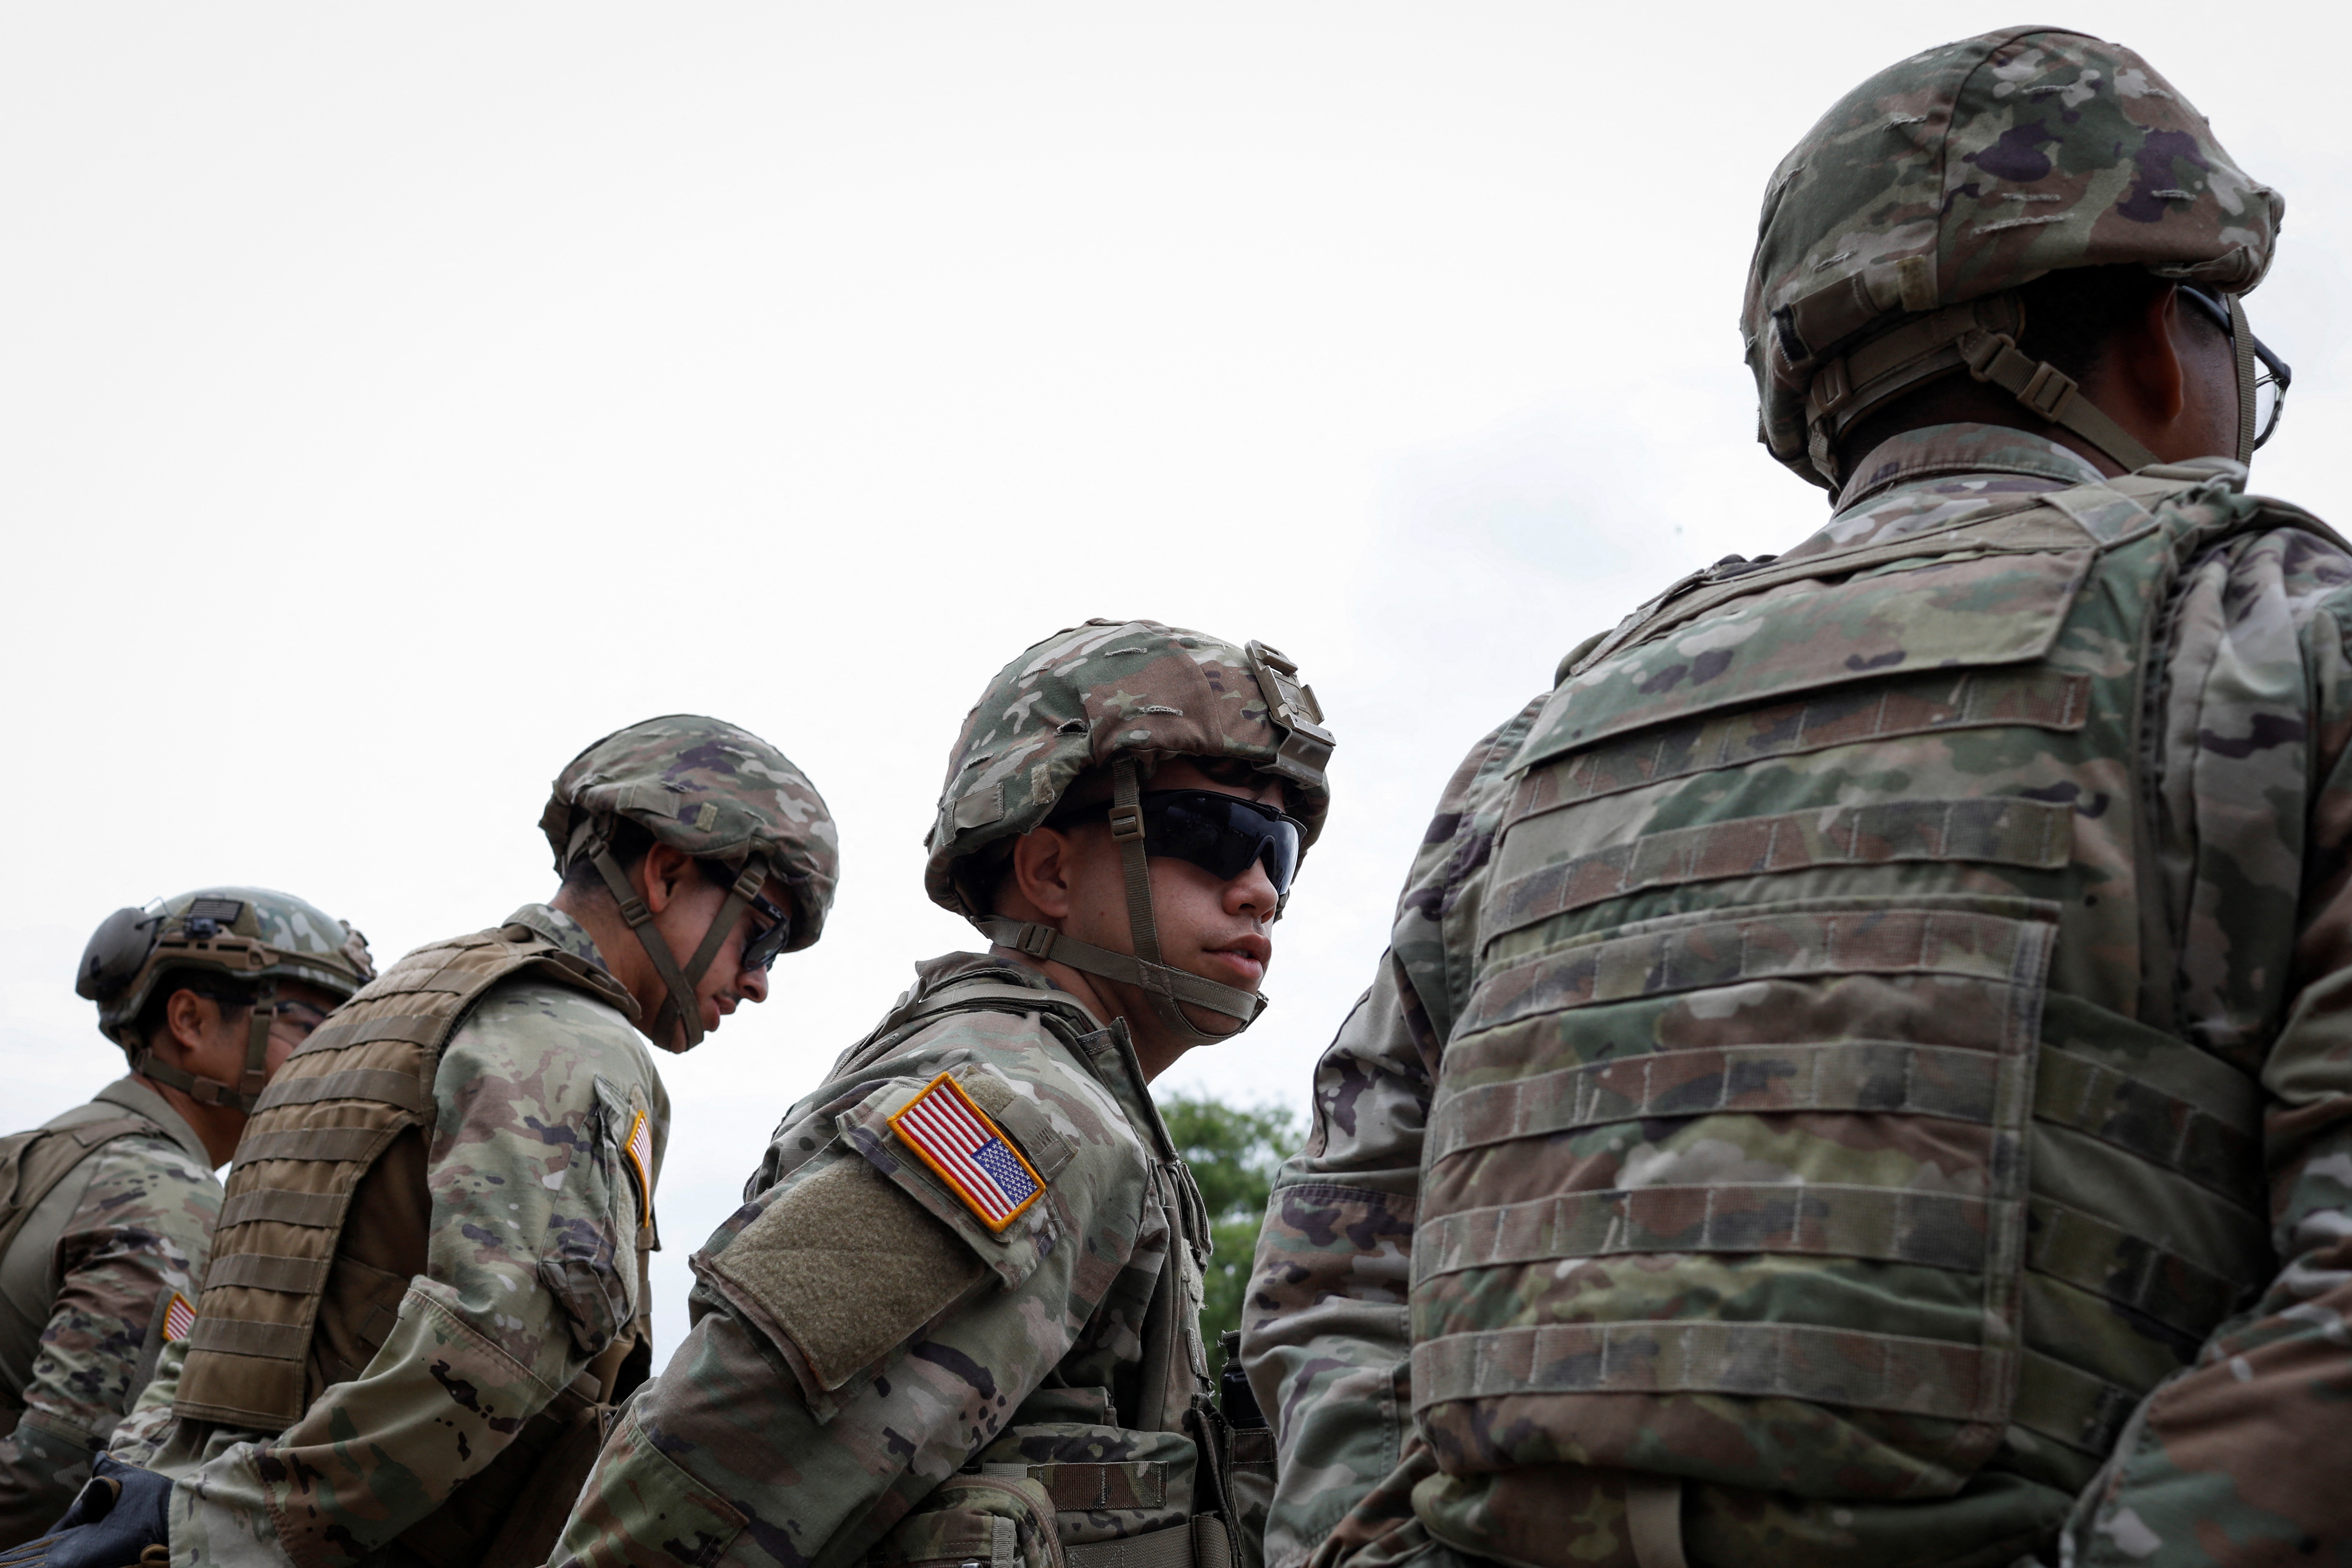 Texas Army National Guard members stand guard during a visit of Texas Governor Greg Abbott to the north banks of the Rio Grande in Eagle Pass, Texas, U.S. May 23, 2022. U.S. authorities, blocked by a federal judge from lifting COVID-19 restrictions that empower agents at the U.S.-Mexico border to turn back migrants, continue to enforce the Title 42 rules which result in the fast expulsion of migrants to Mexico or other countries. REUTERS/Marco Bello